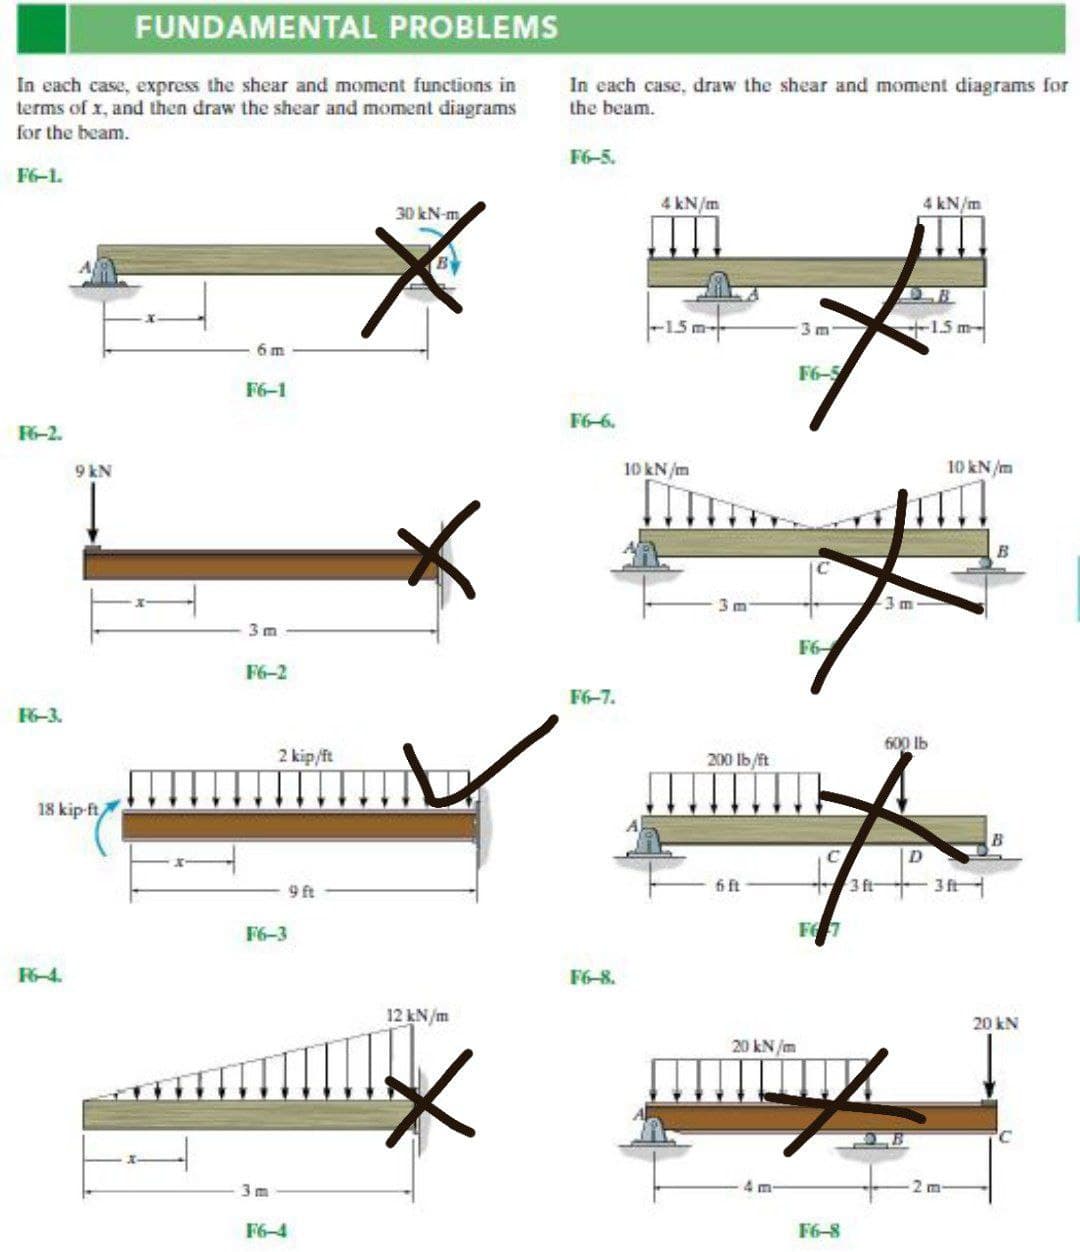 FUNDAMENTAL PROBLEMS
In each case, express the shear and moment functions in
terms of x, and then draw the shear and moment diagrams
for the beam.
In each case, draw the shear and moment diagrams for
the beam.
F6-5.
F6-1.
4 kN/m
4 kN/m
30 kN-m
-15 m+
3 m
15 m-
6 m
F6-5
F6-1
F6-6.
6-2.
9 kN
10 kN /m
10 kN/m
C
3 m
F6-
F6-2
F6-7.
6-3.
600 Ib
2 kip/ft
200 Ib/ft
18 kip-ft
B
9 ft
6ft
3 ft
3 ft
F6-3
-4.
F6-8.
12 kN/m
20 kN
20 kN /m
3m
4 m
m
F6-4
F6-8
